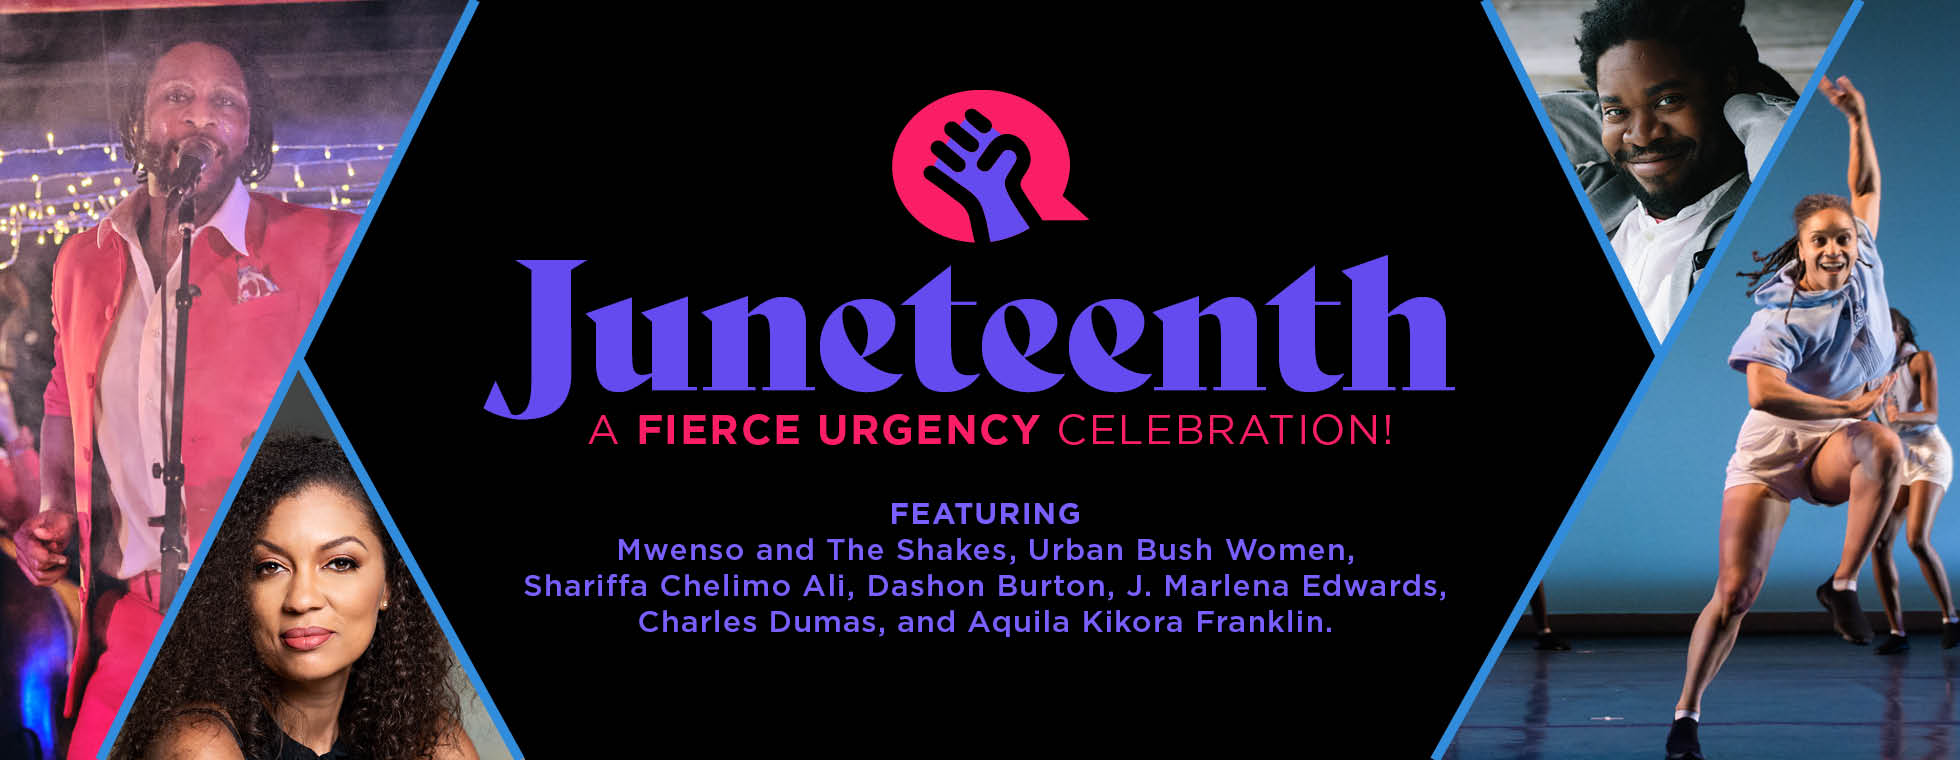 Juneteenth: A Fierce Urgency Celebration! Michael Mwenso sings into a microphone. Samantha Speis dances with a leg and arm raised in the air.